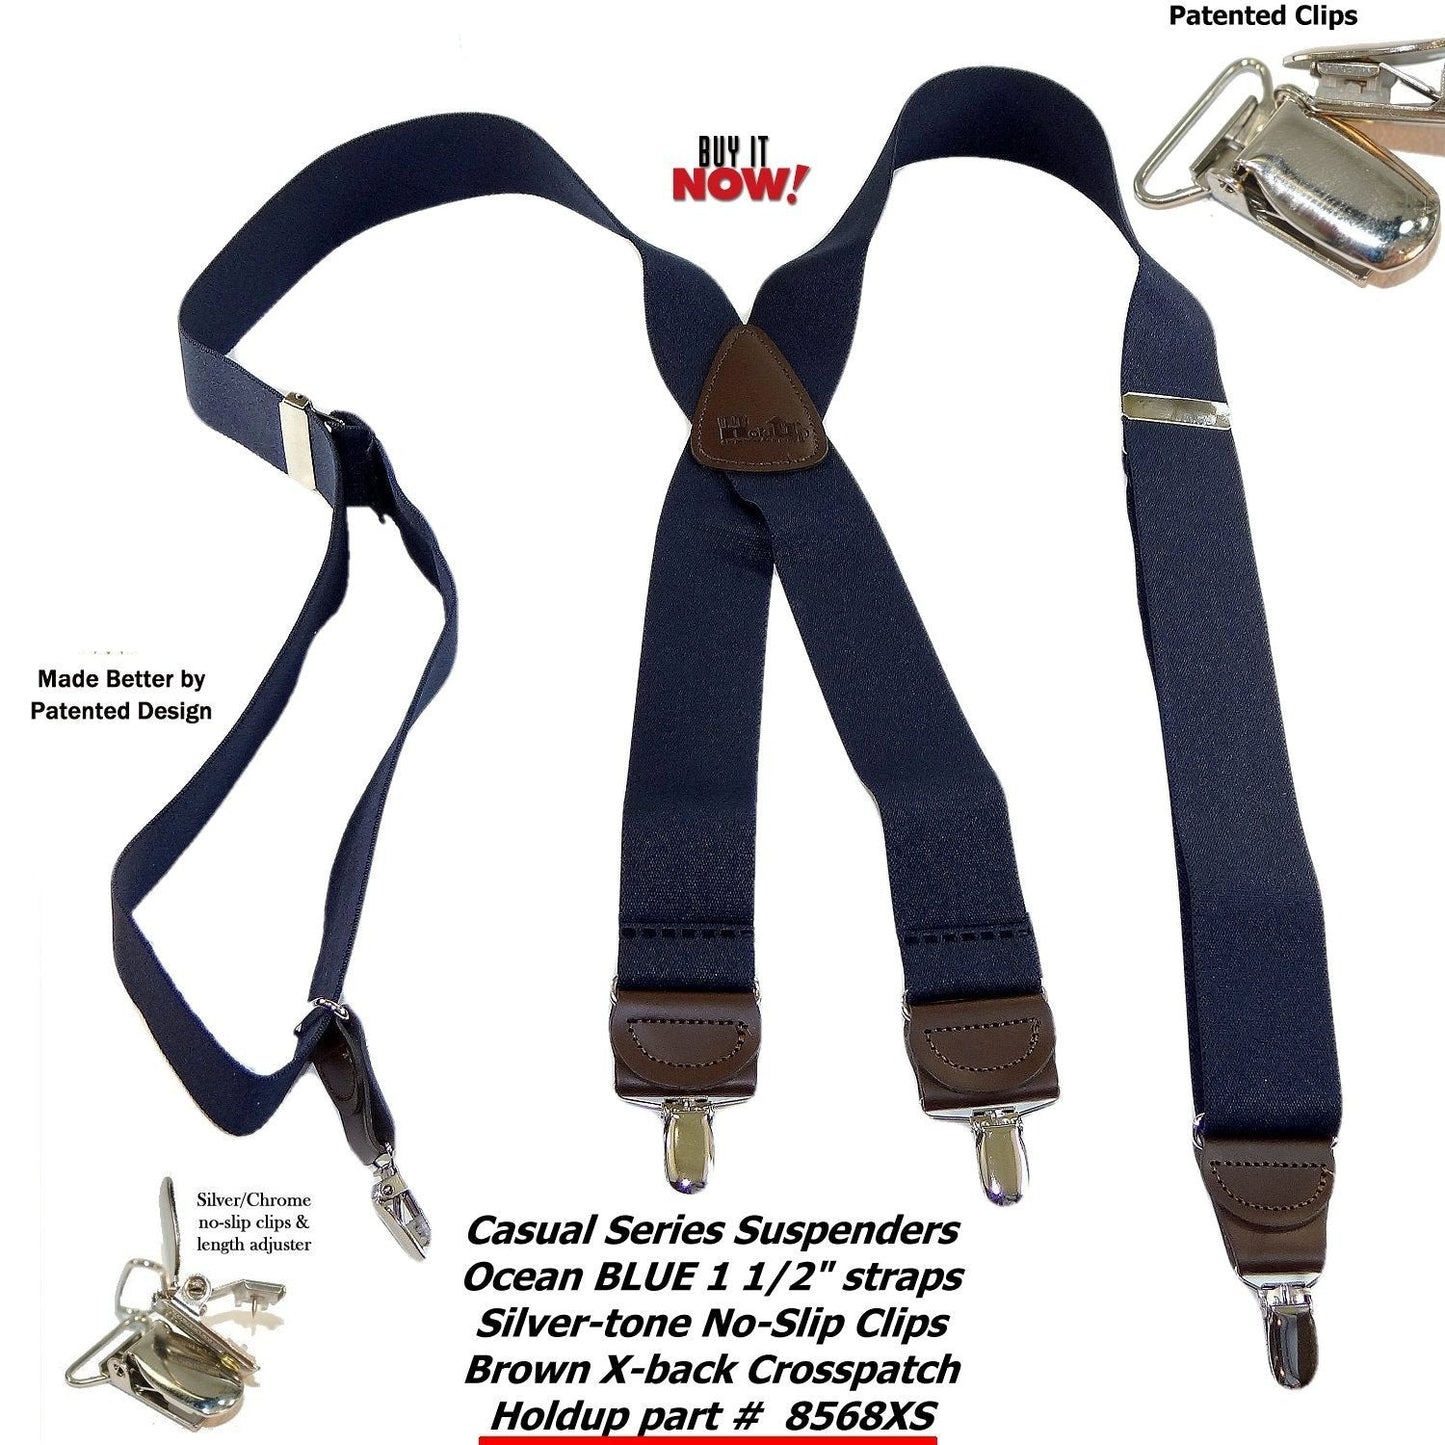 Holdup Brand Ocean Blue Casual Series Men's Suspenders in X-back Style and USA Patented No-slip Silver-tone Clips